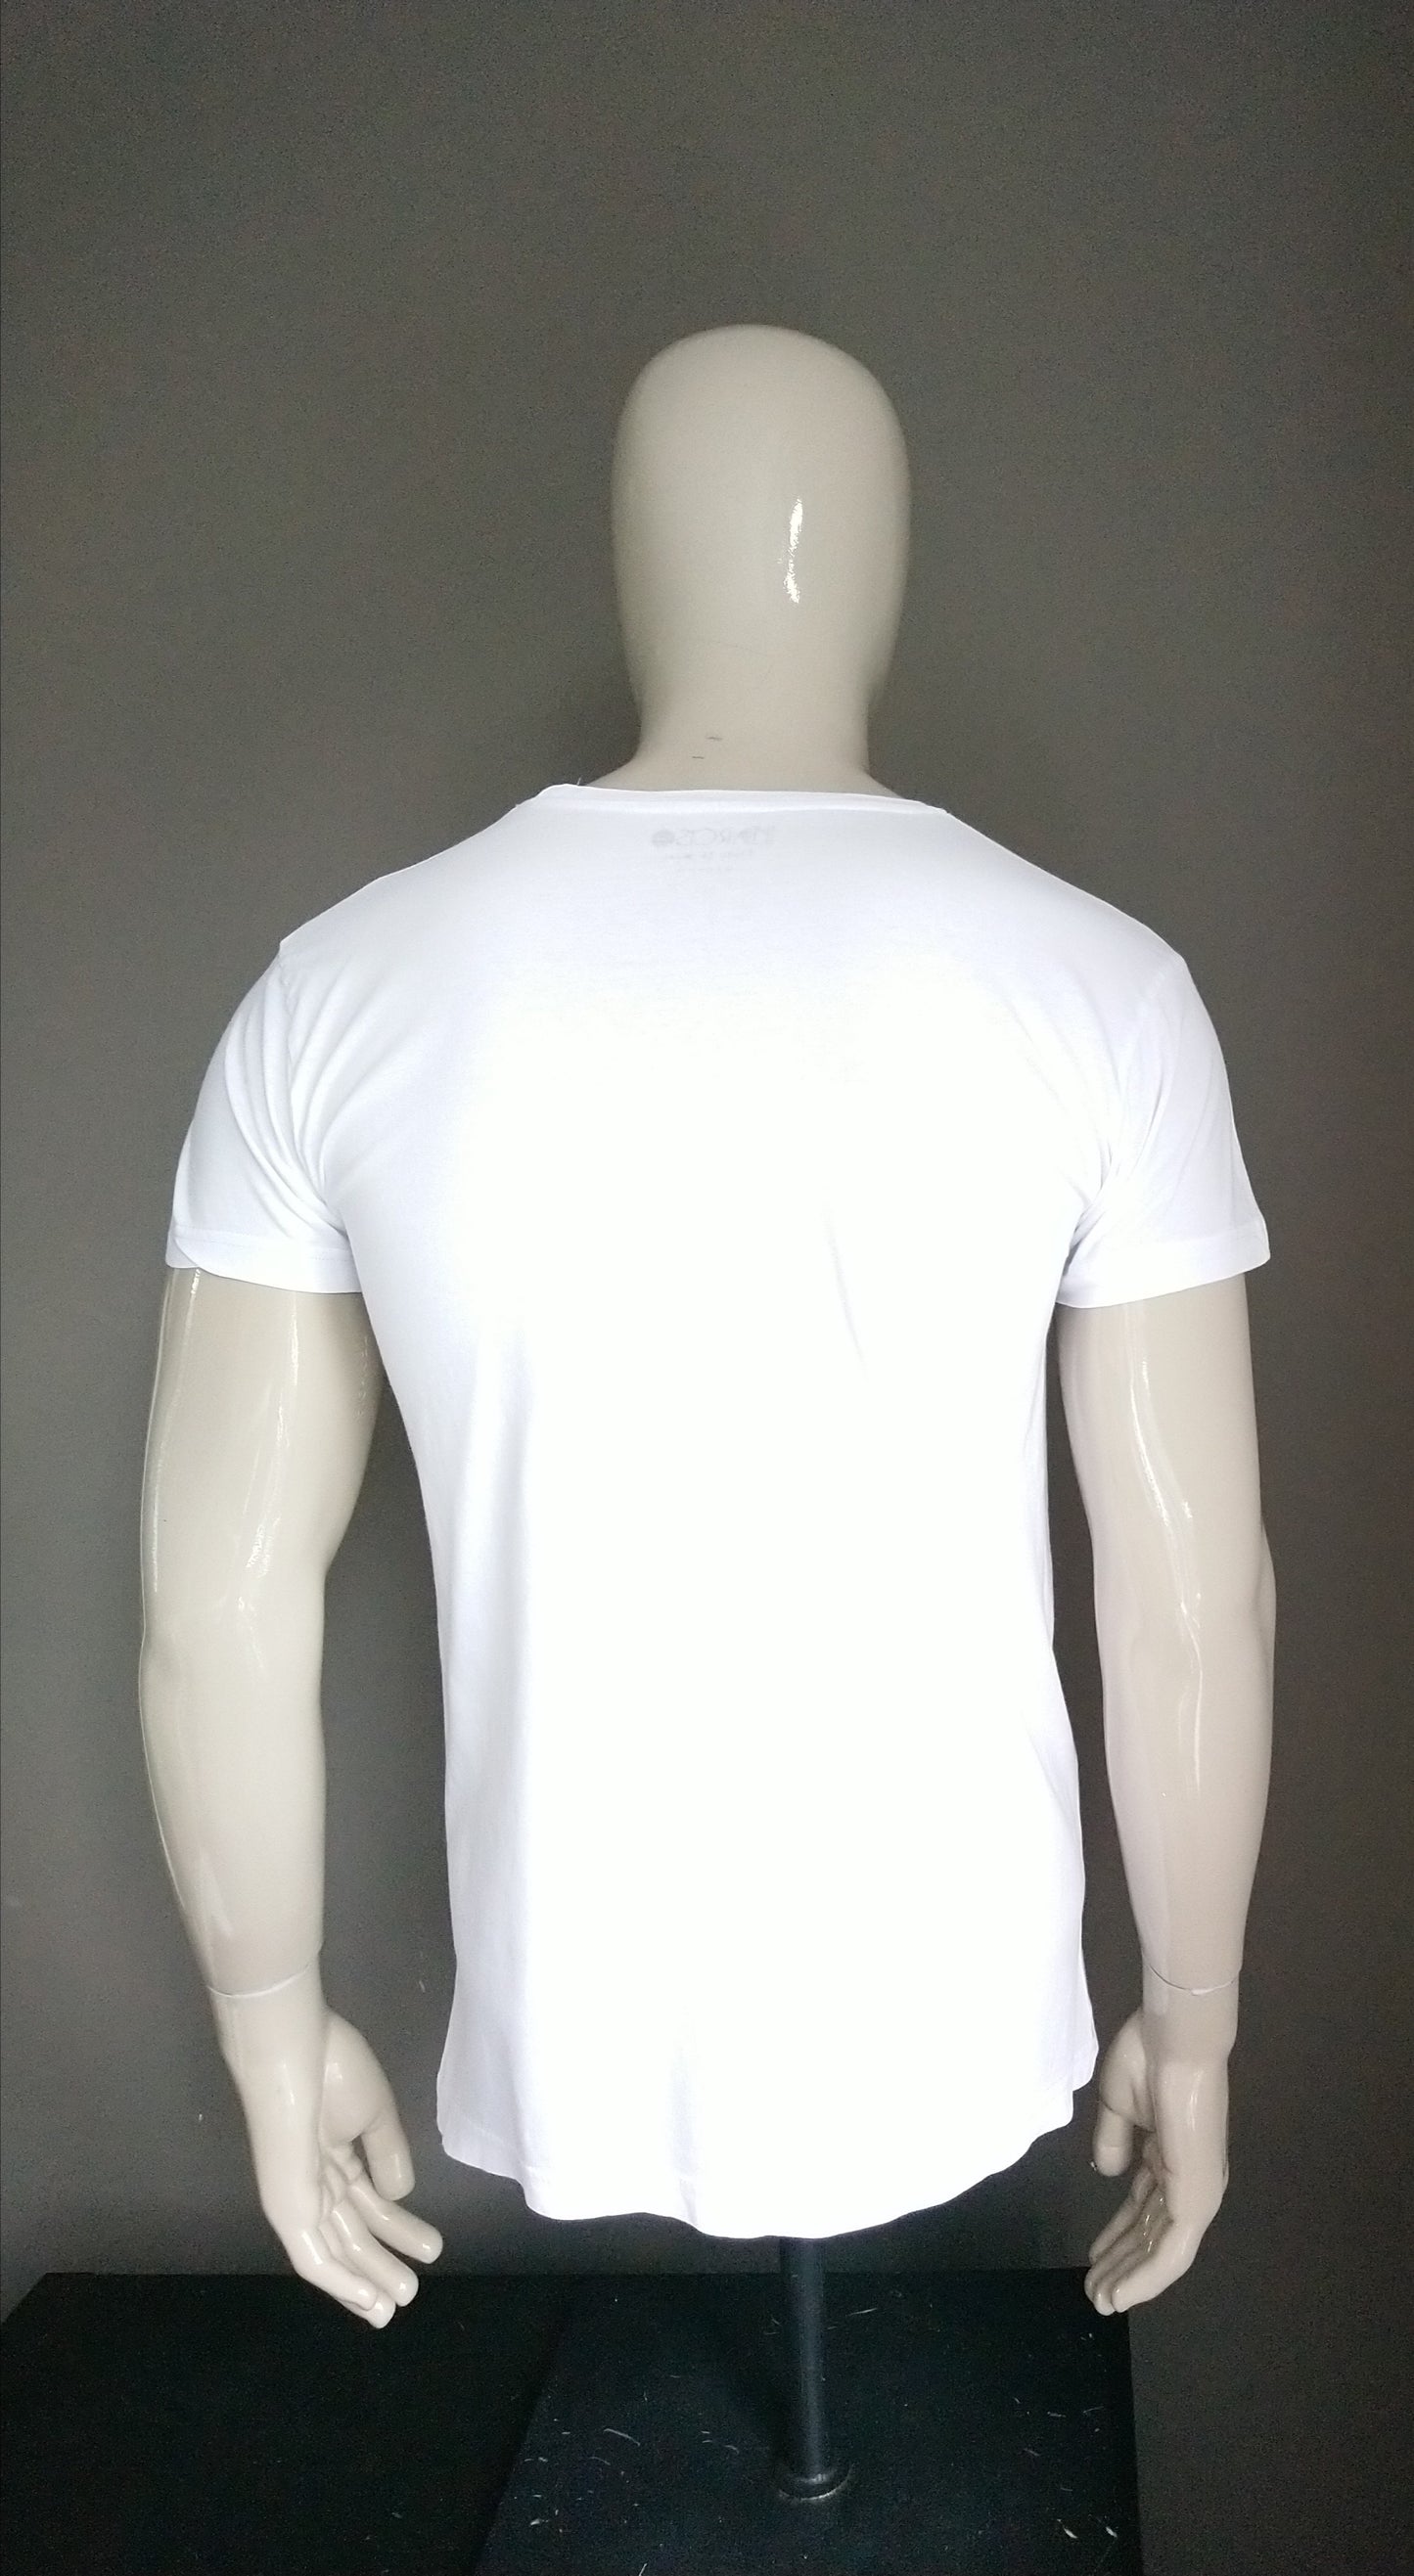 Narciso ready to wear shirt. Wit met opdruk. Maat M.